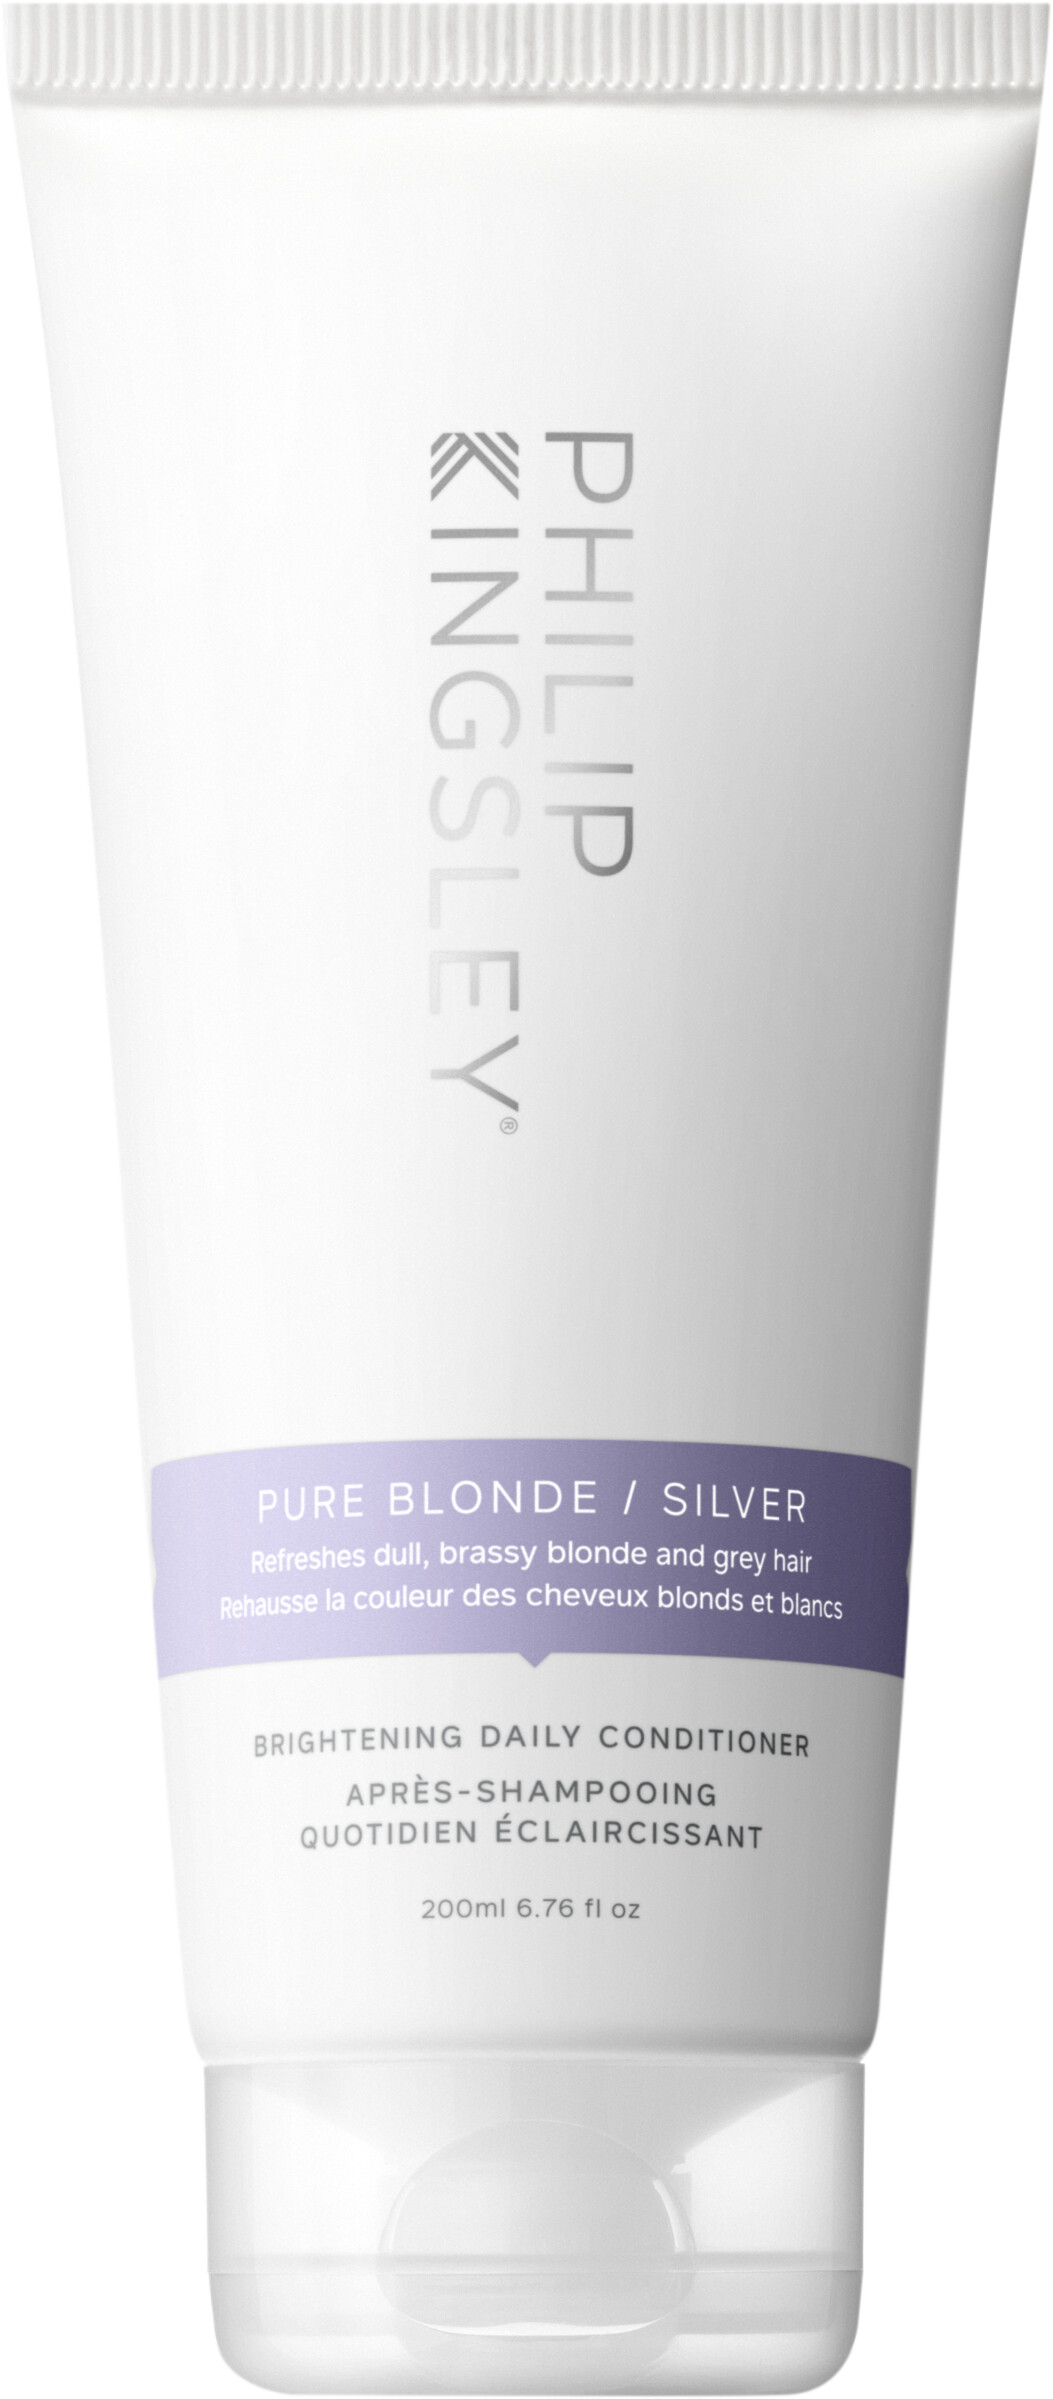 Philip Kingsley Pure Blonde / Silver Brightening Daily Conditioner 200ml